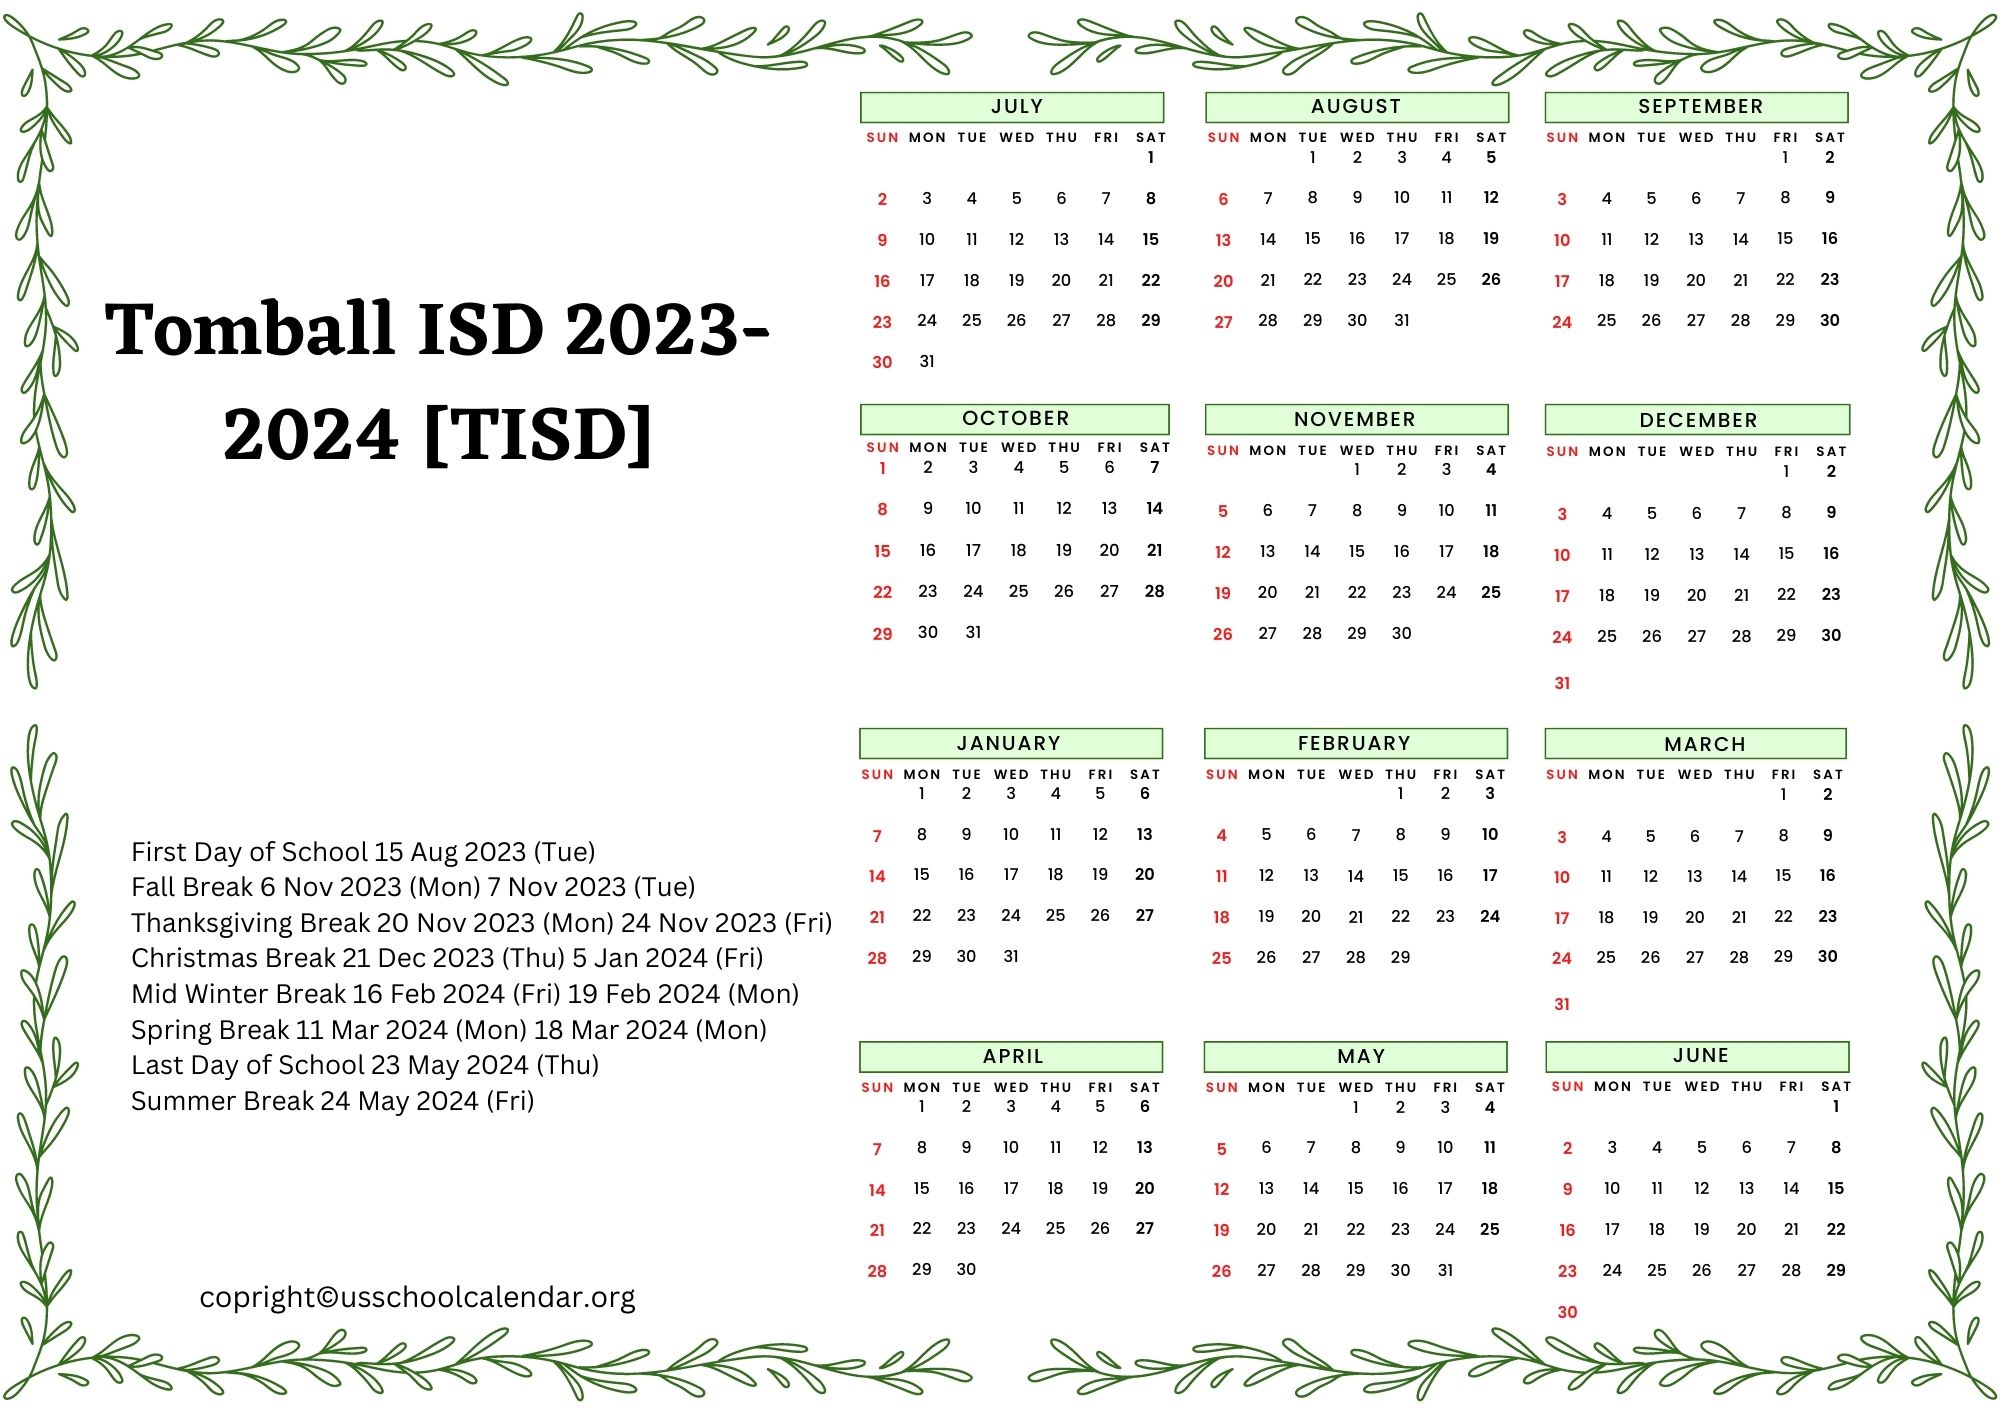 Tomball ISD Calendar with Holidays 20232024 [TISD]